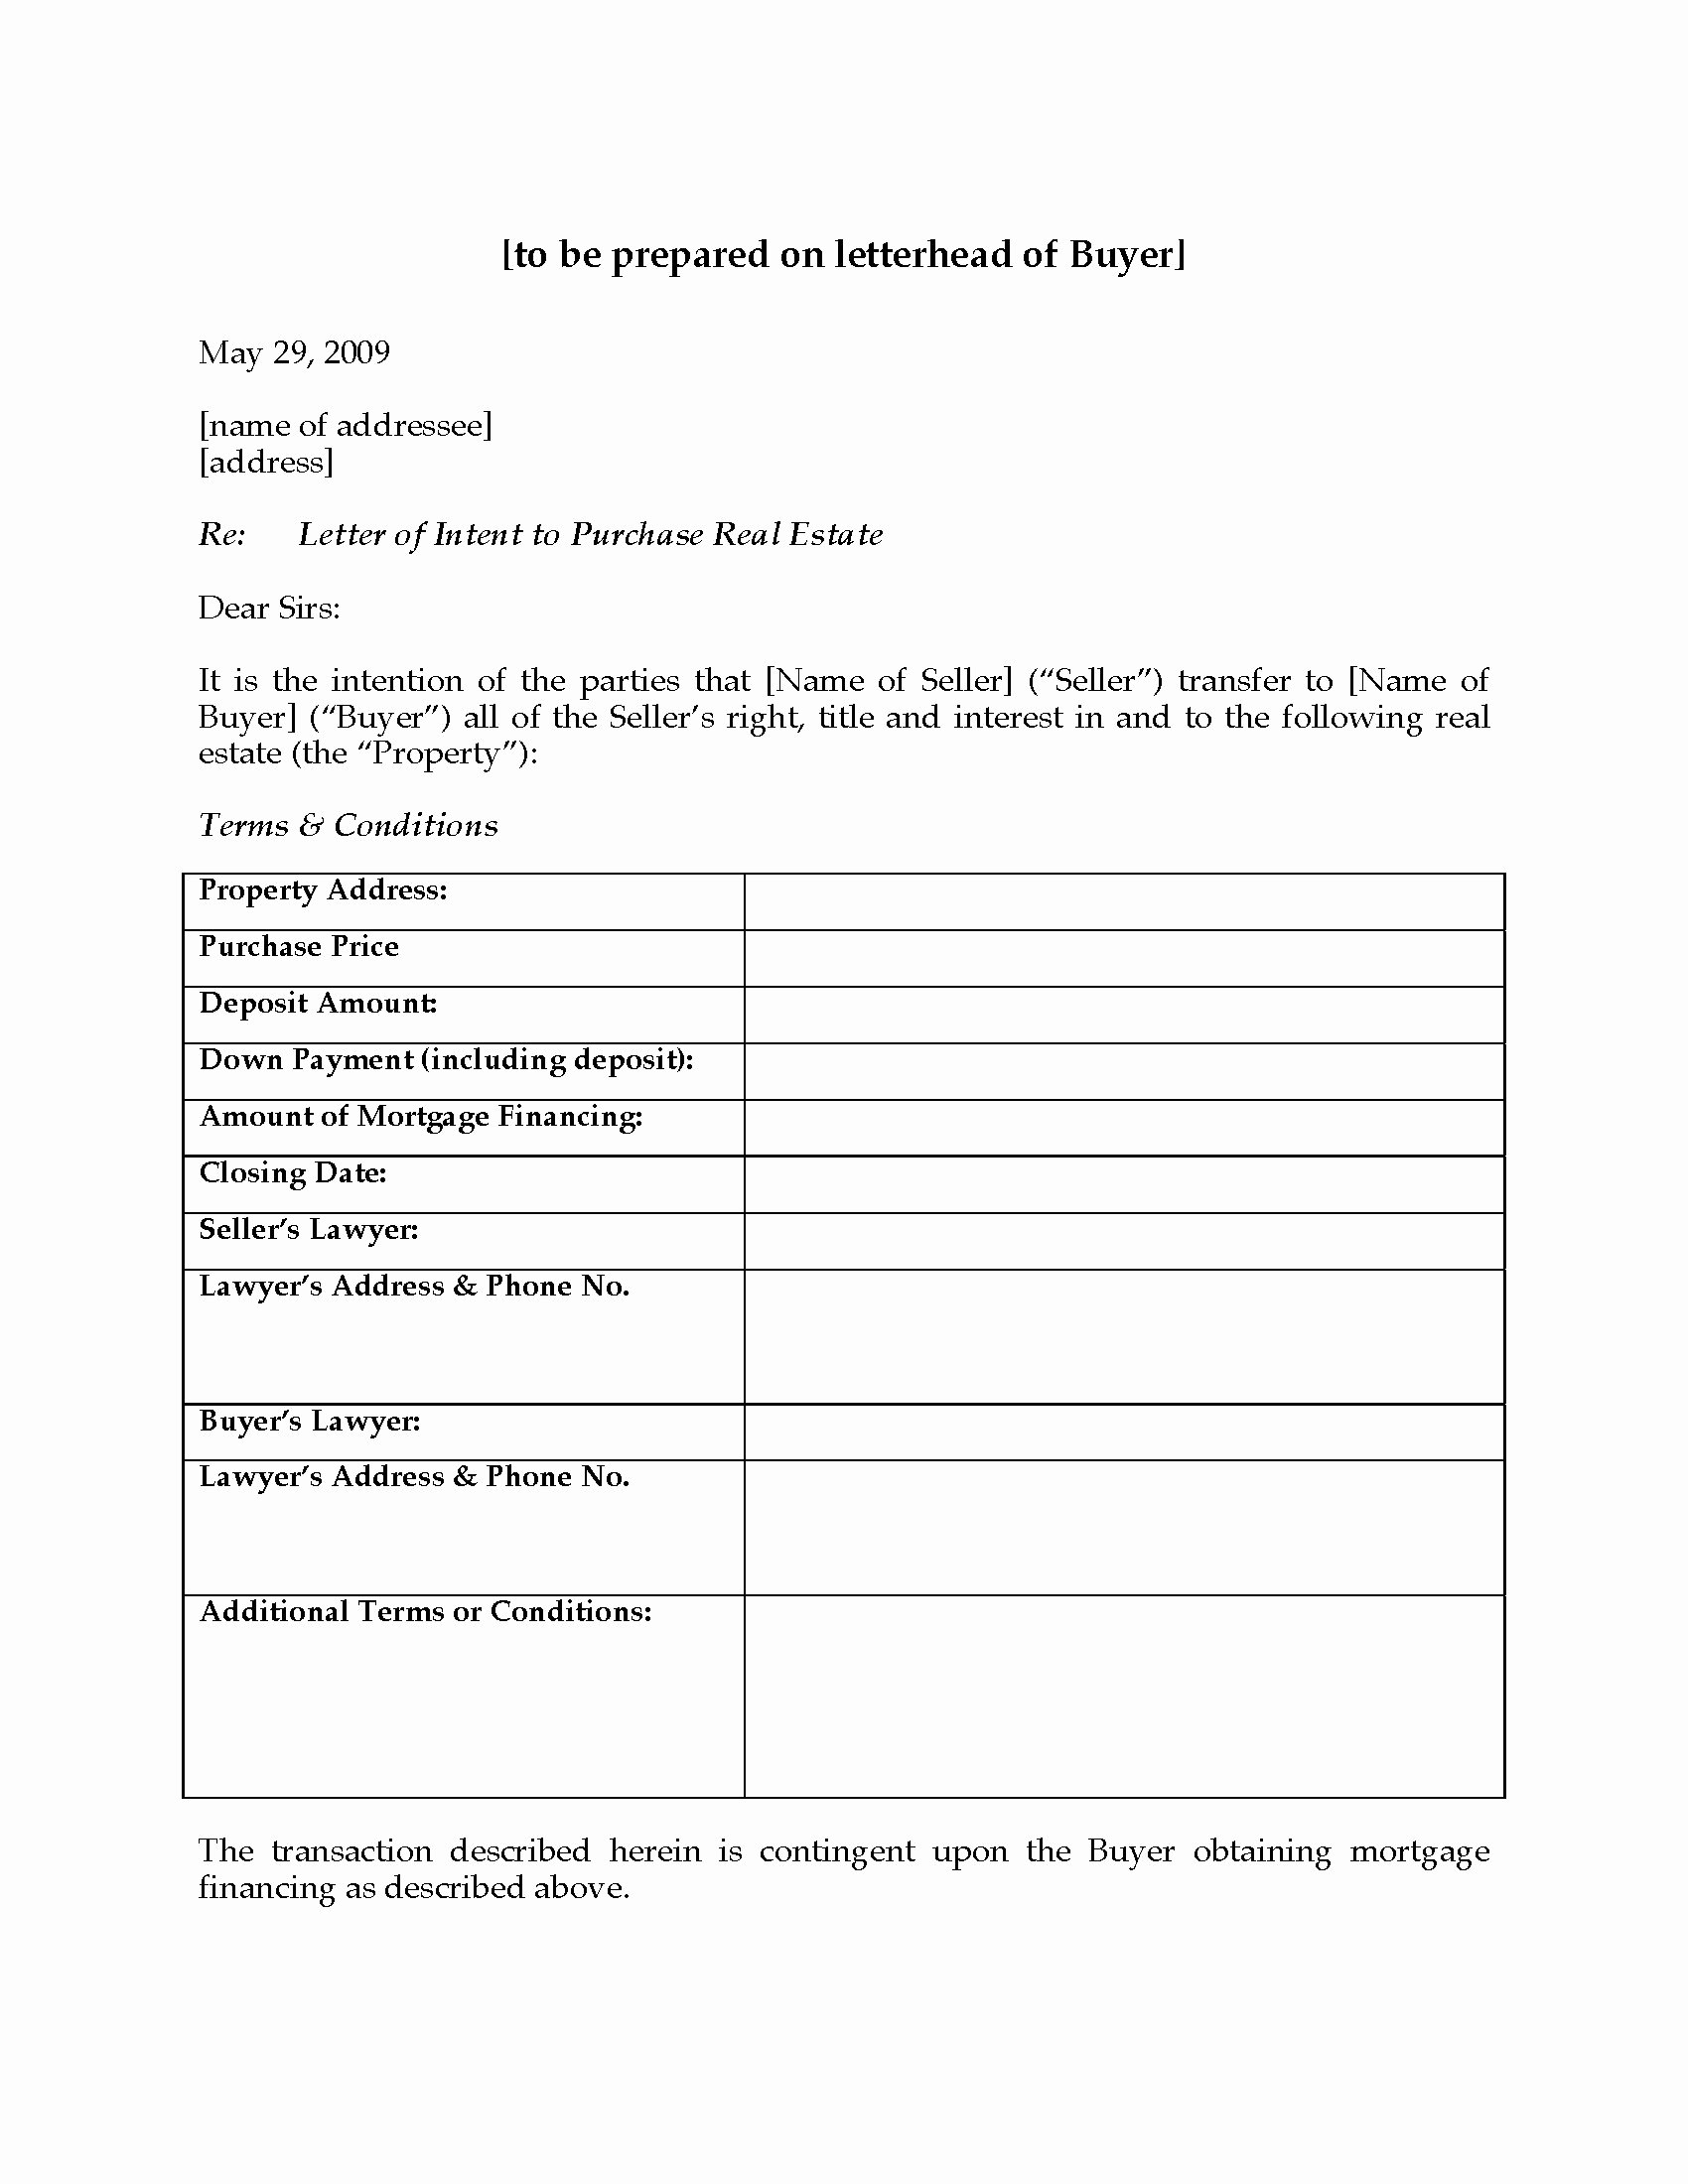 Letter Of Intent to Purchase Real Estate Template Fresh Canada Letter Of Intent to Purchase Real Estate